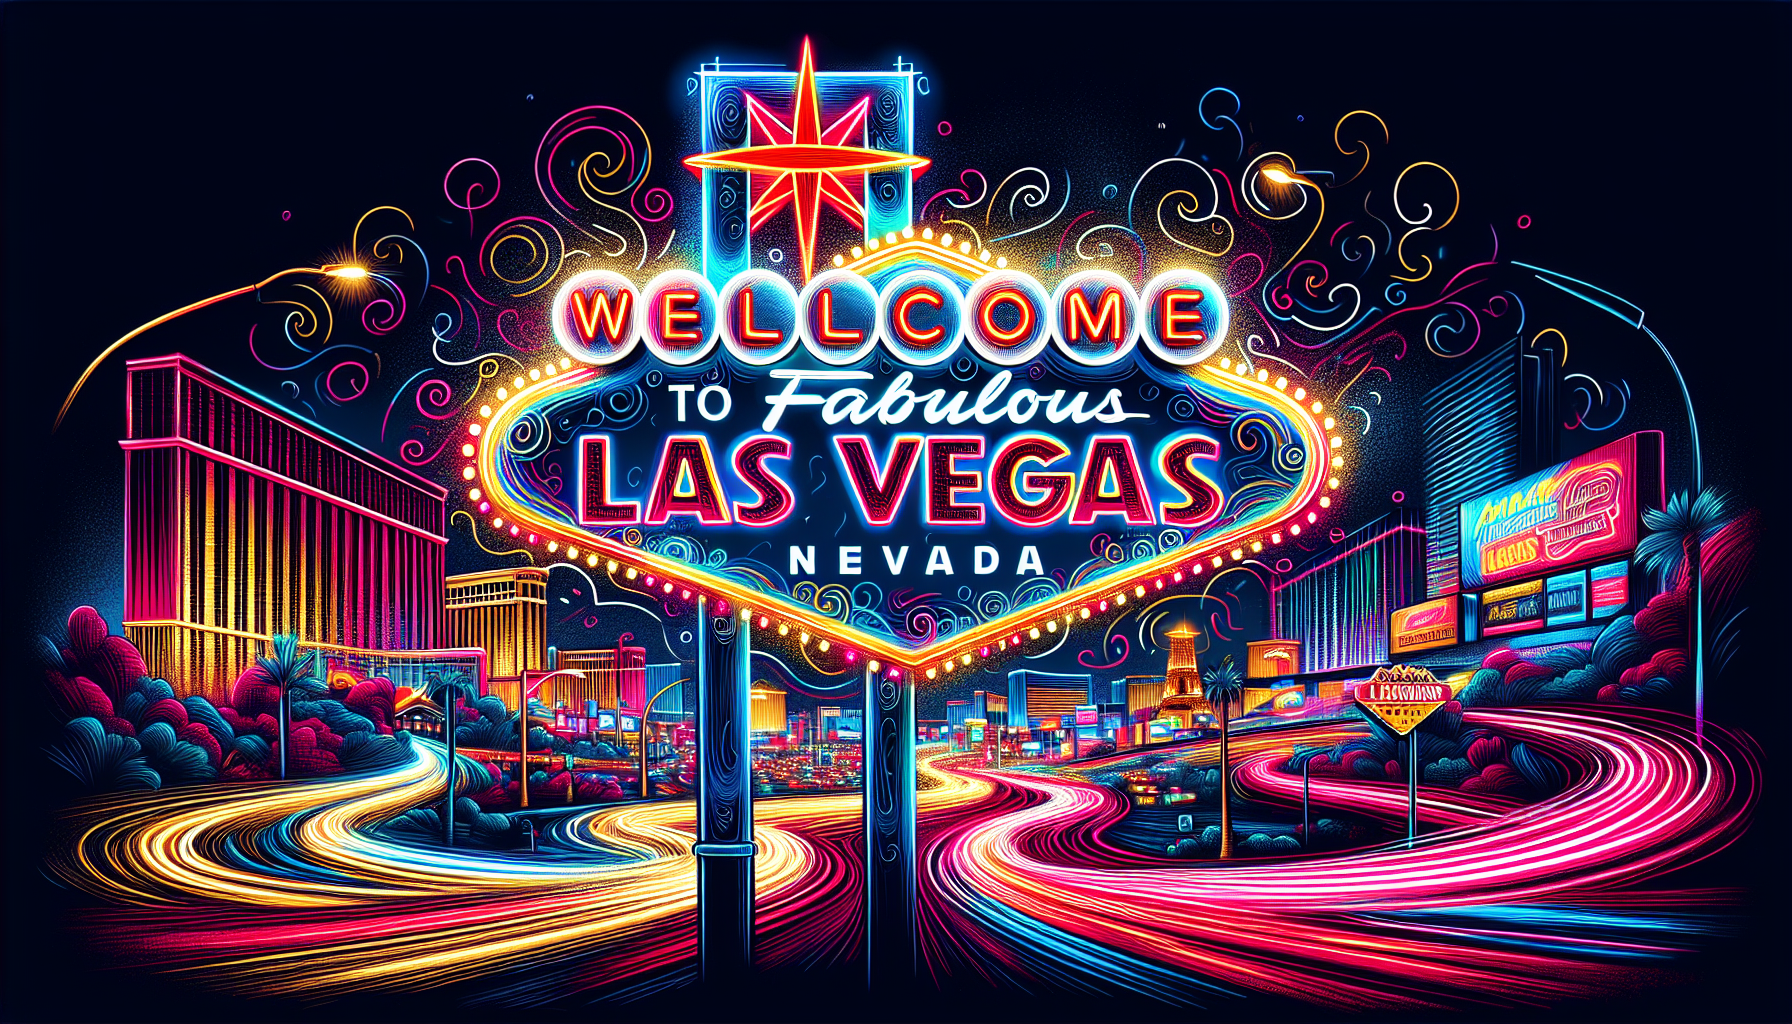 The iconic Welcome to Fabulous Las Vegas Sign